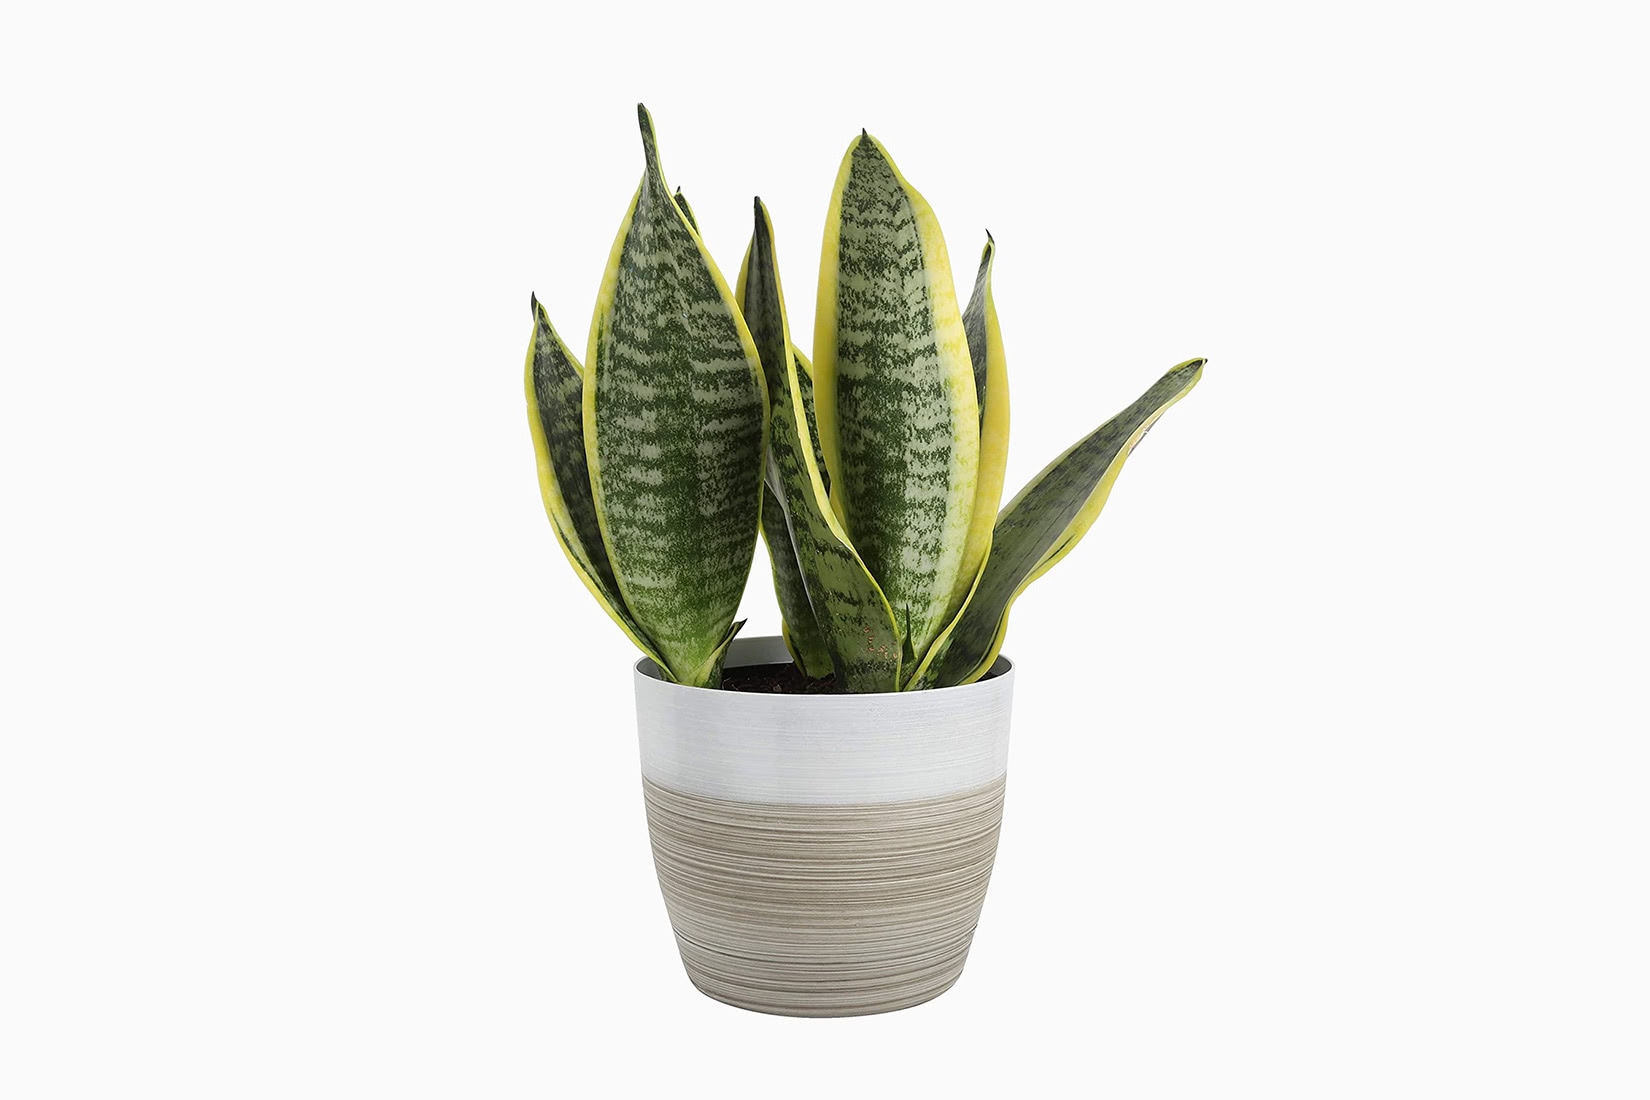 Jmbamboo Parlor Palm House Plant Collection Spider Plant Snake Plant 